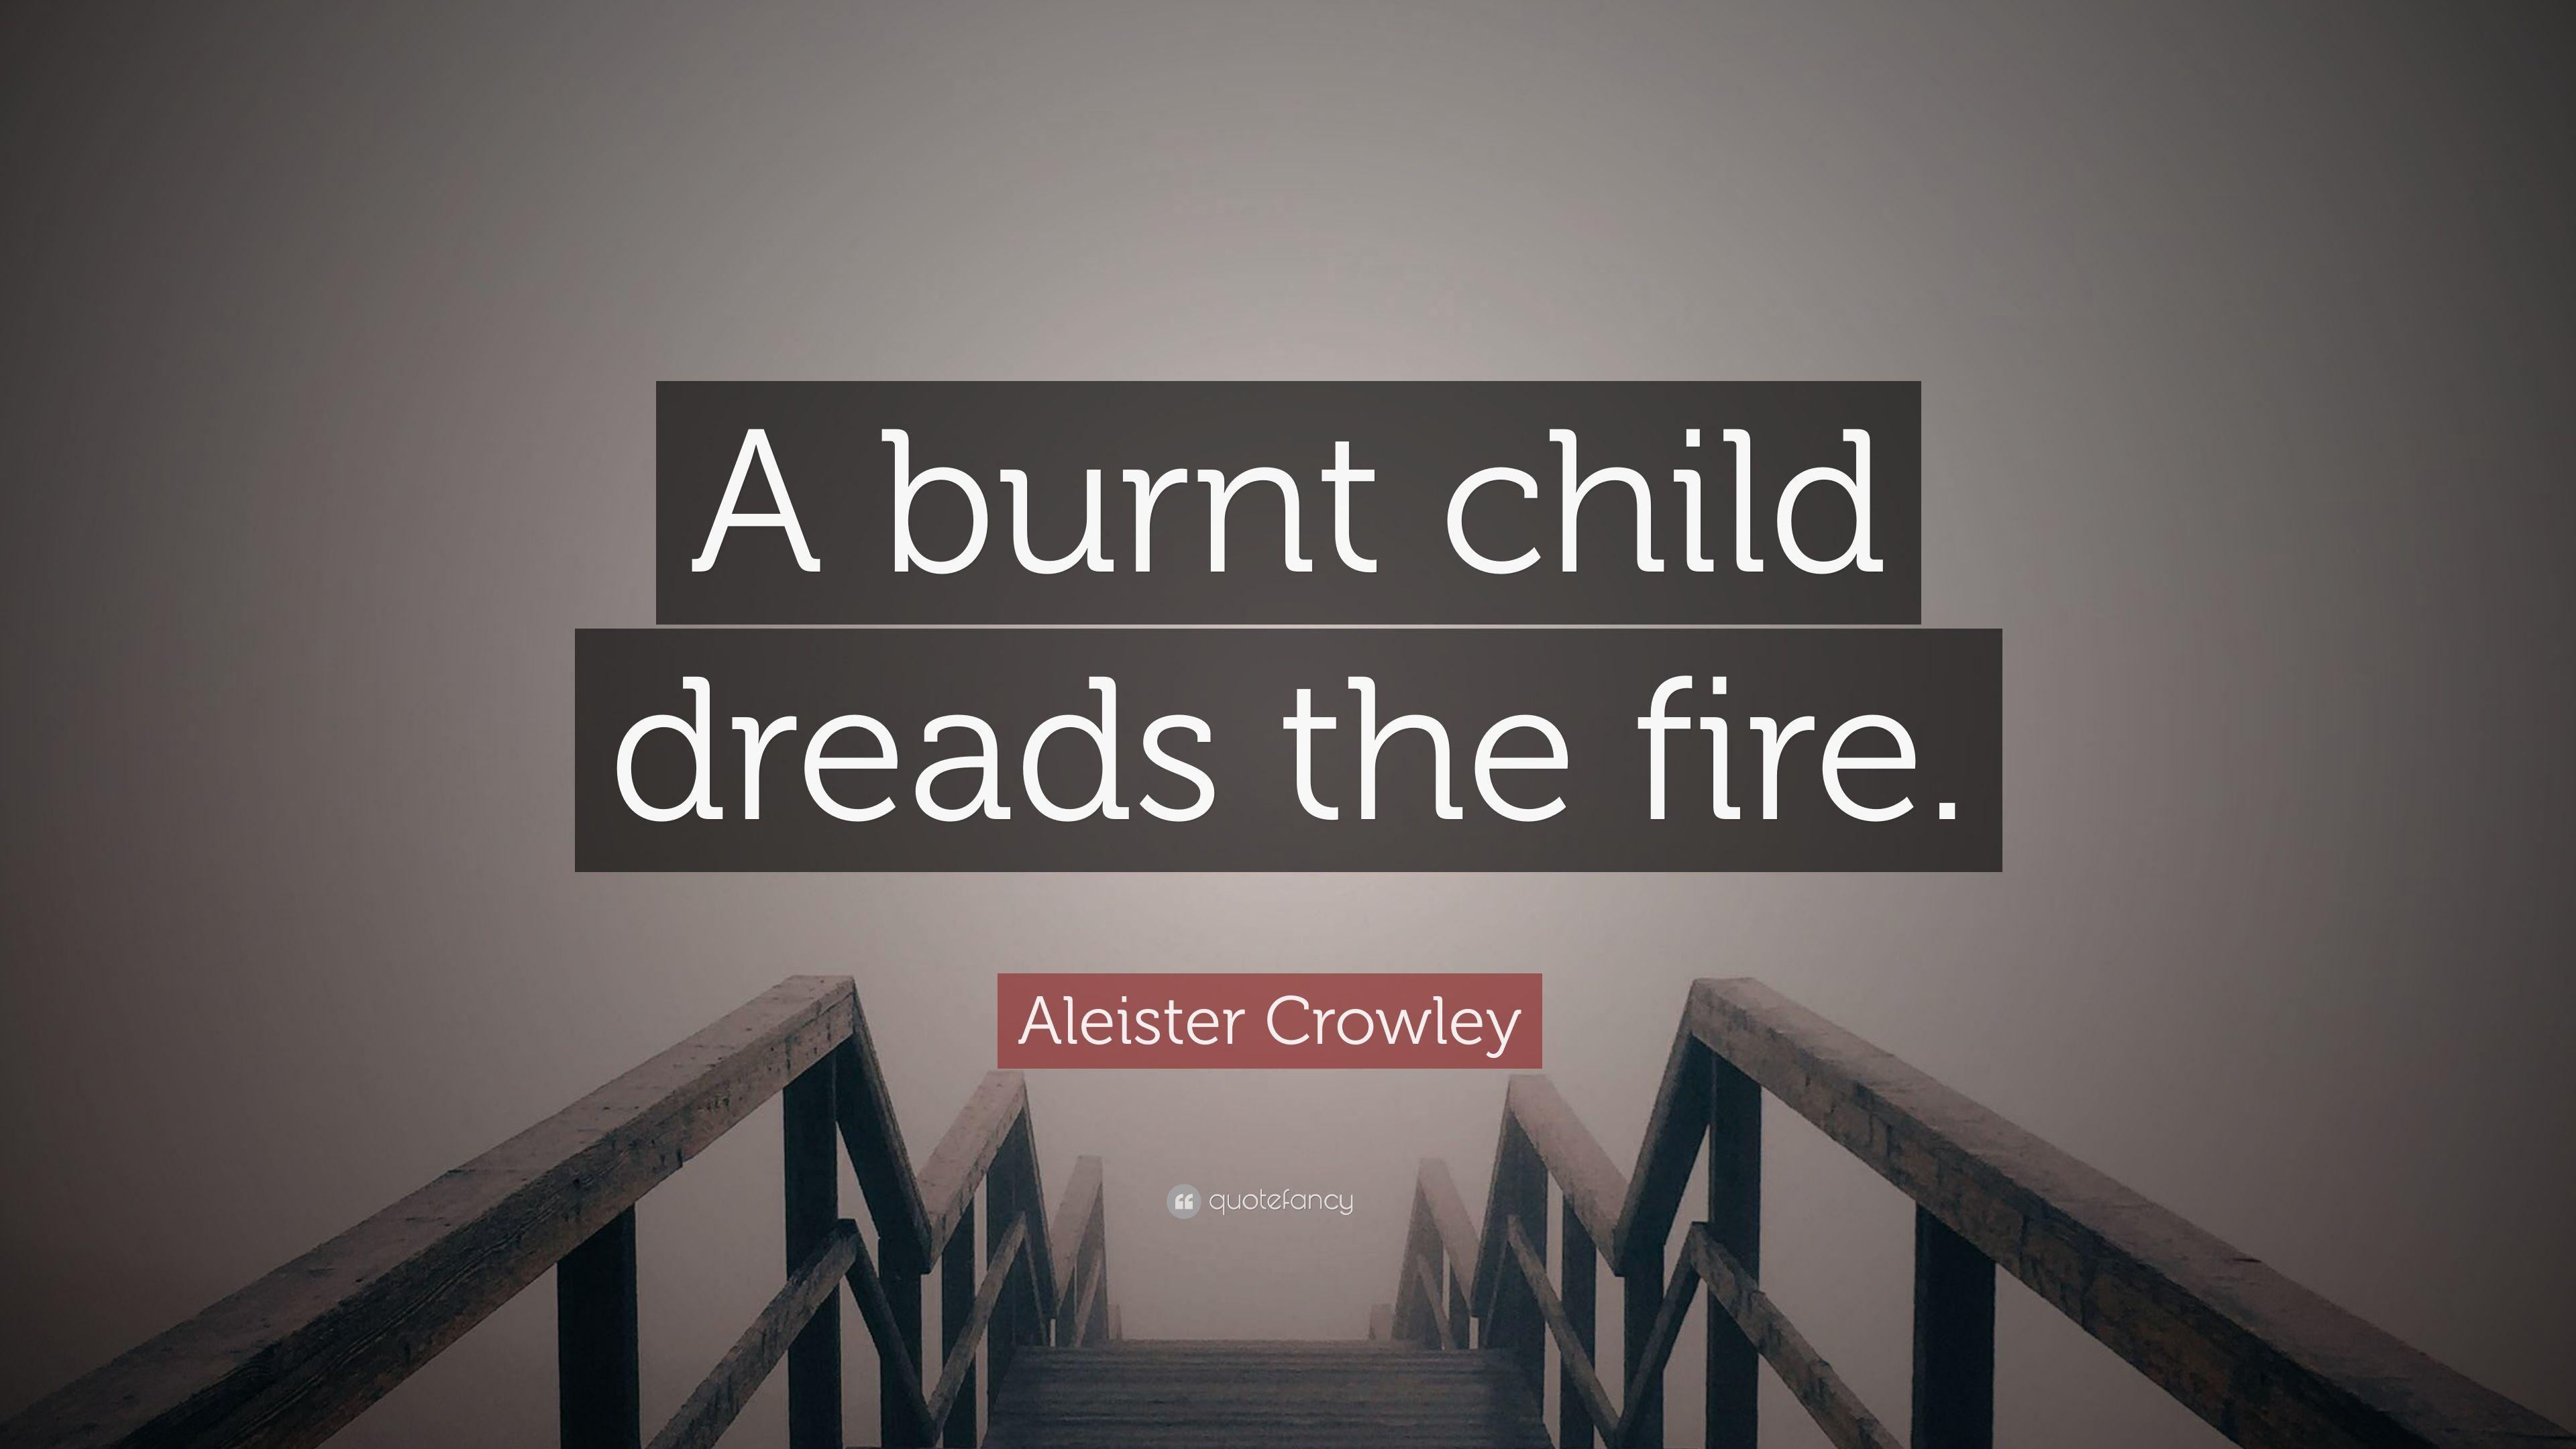 Aleister Crowley Quote: “A burnt child dreads the fire.” 12